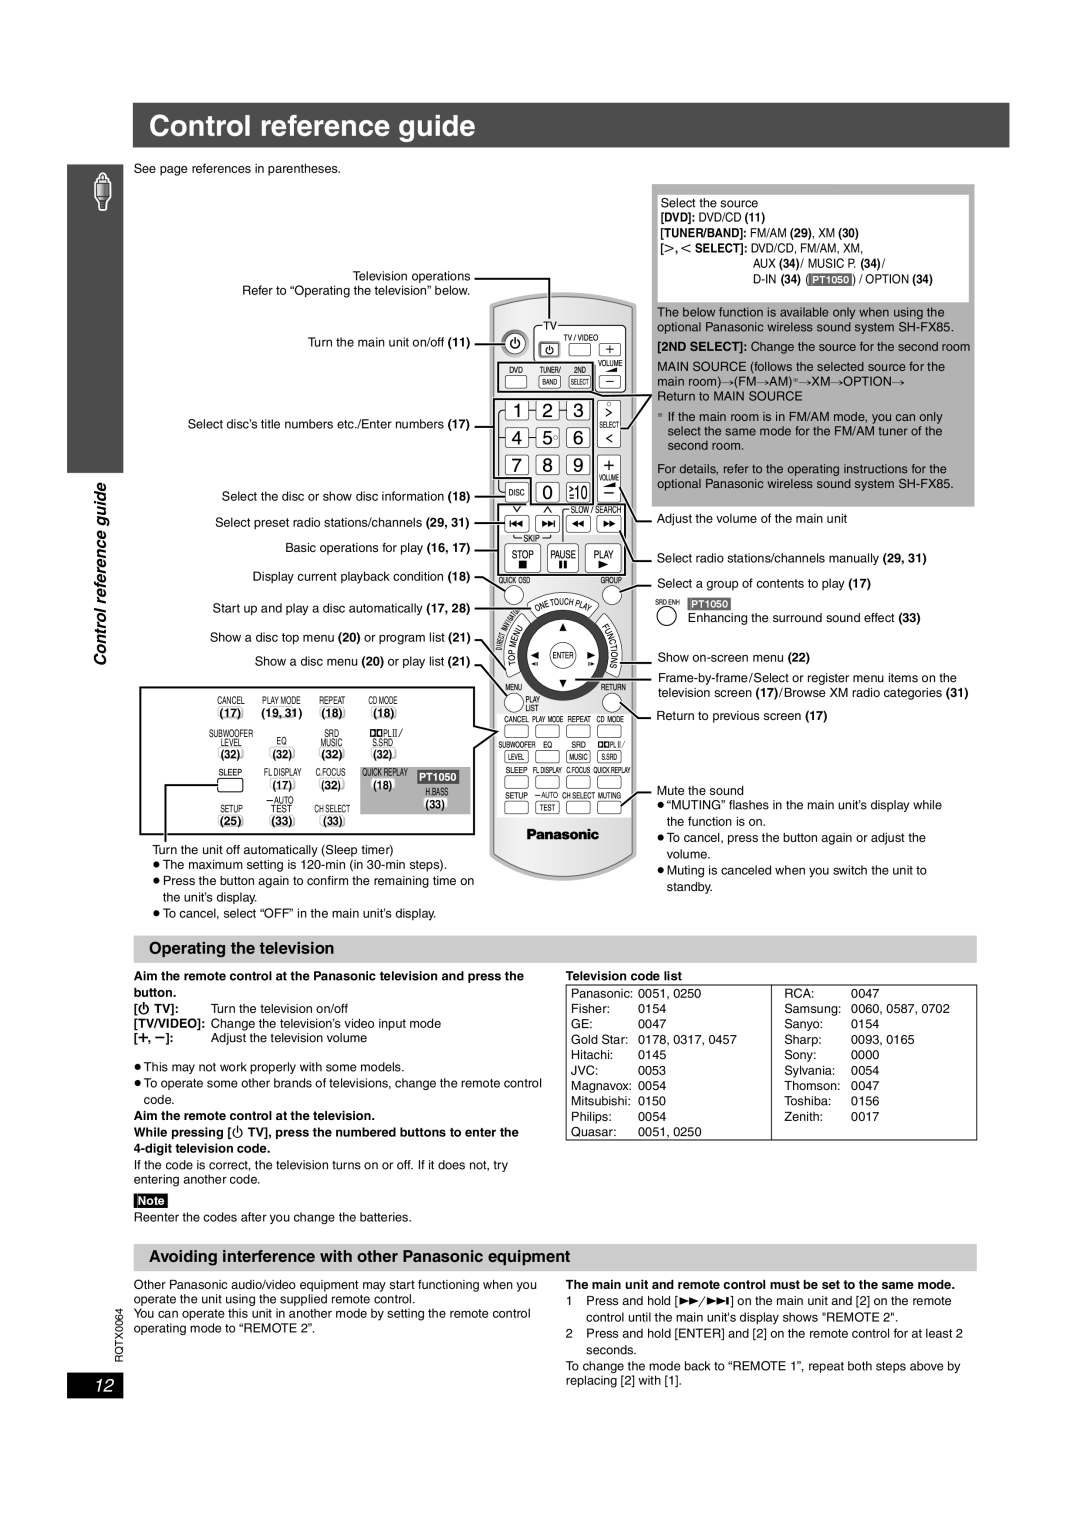 Panasonic SCPT950, SC-PT953, SCPT1050 operating instructions Control reference guide, Operating the television 